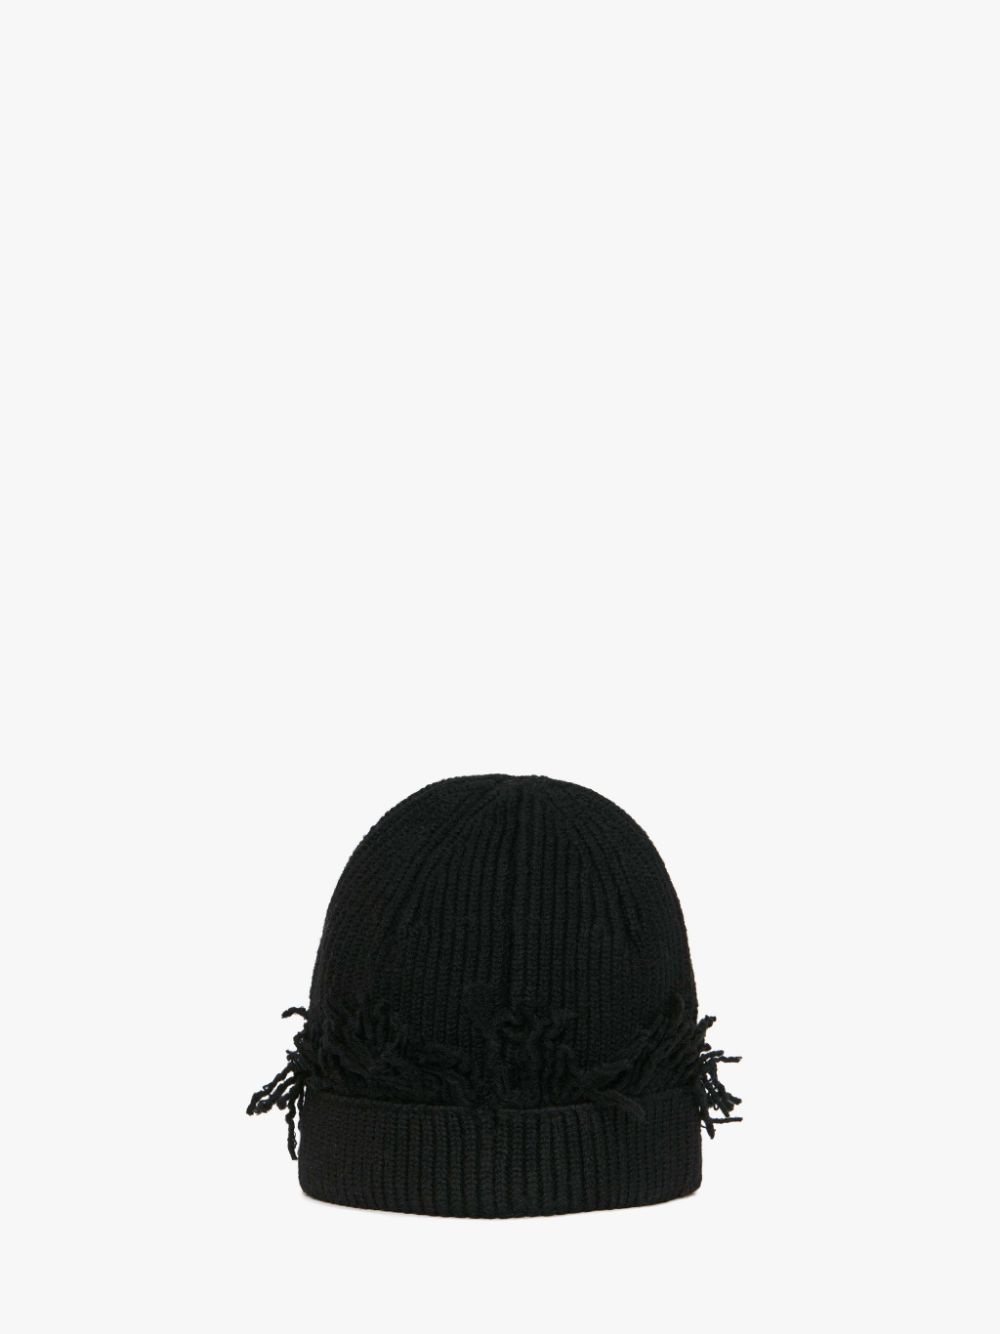 BEANIE WITH FRINGE DETAIL - 1